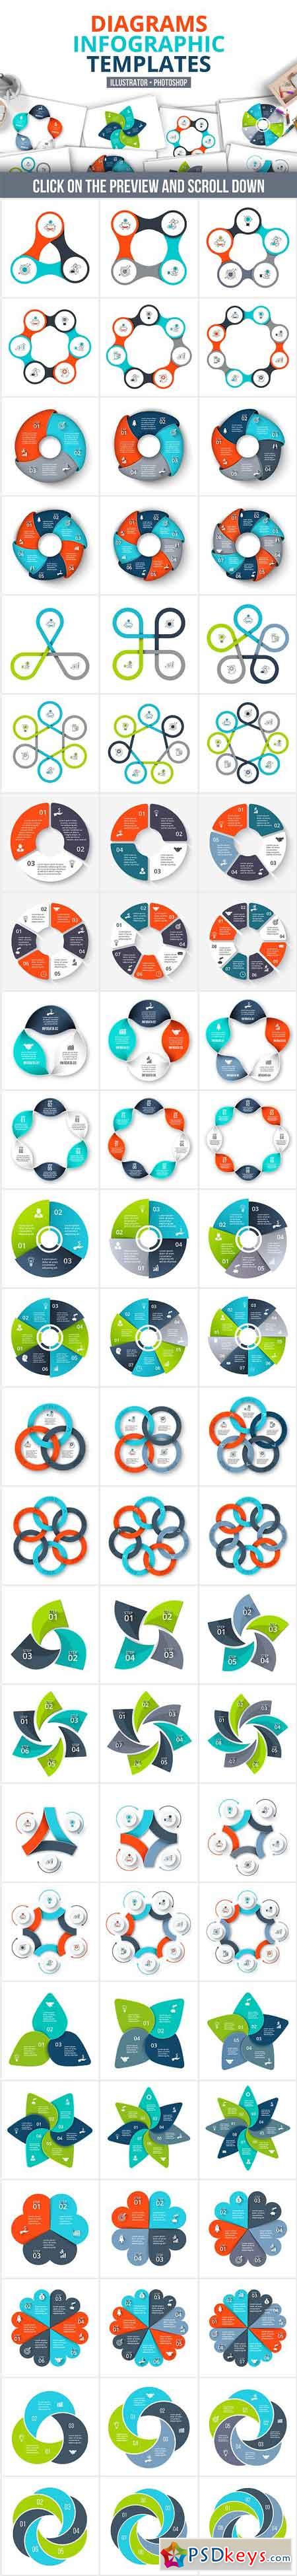 Diagrams infographic templates 967015